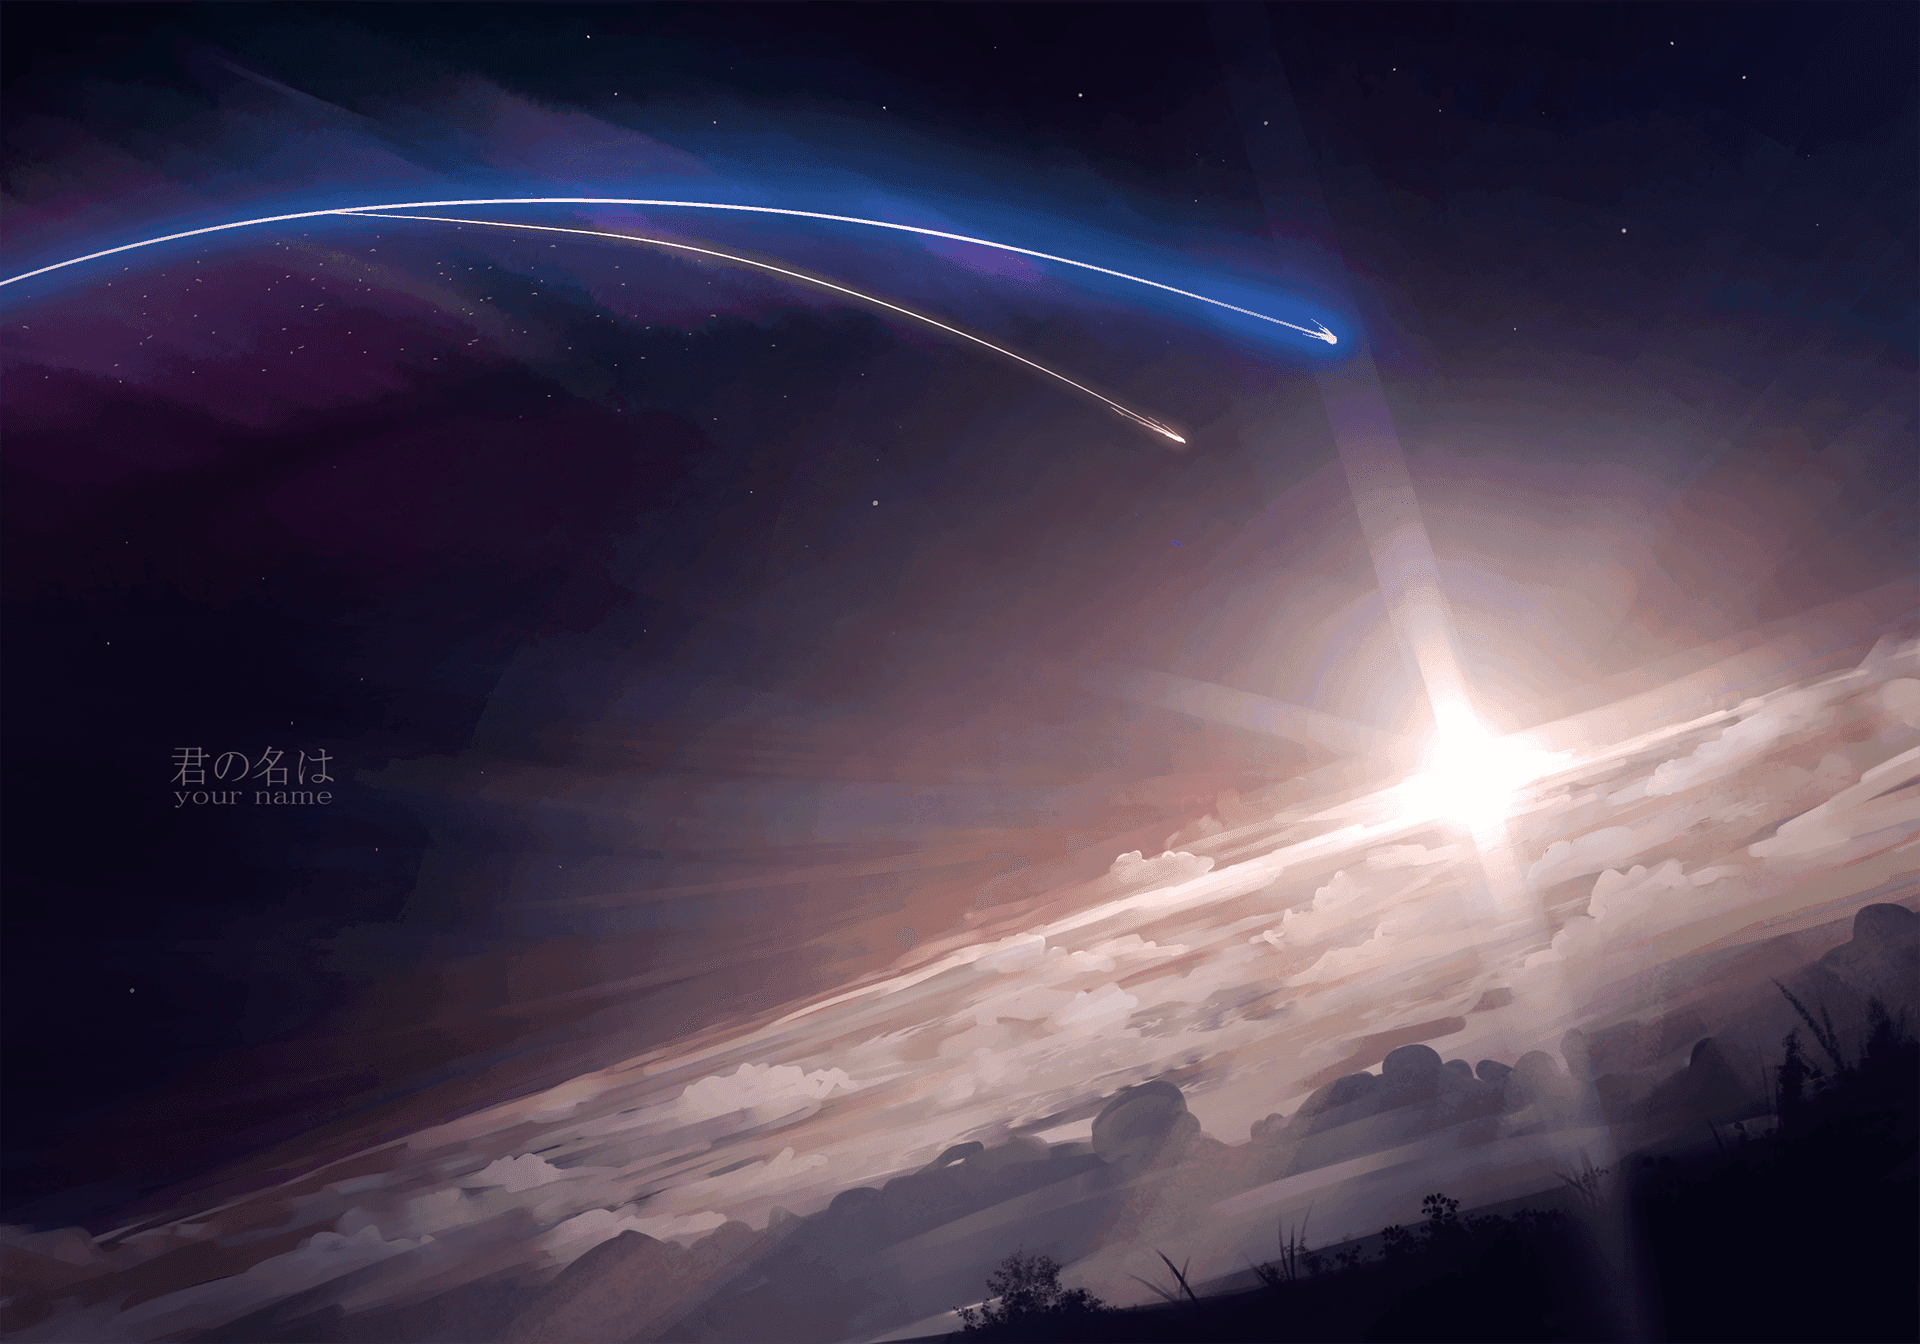 Watch the stars as you journey in "Your Name"